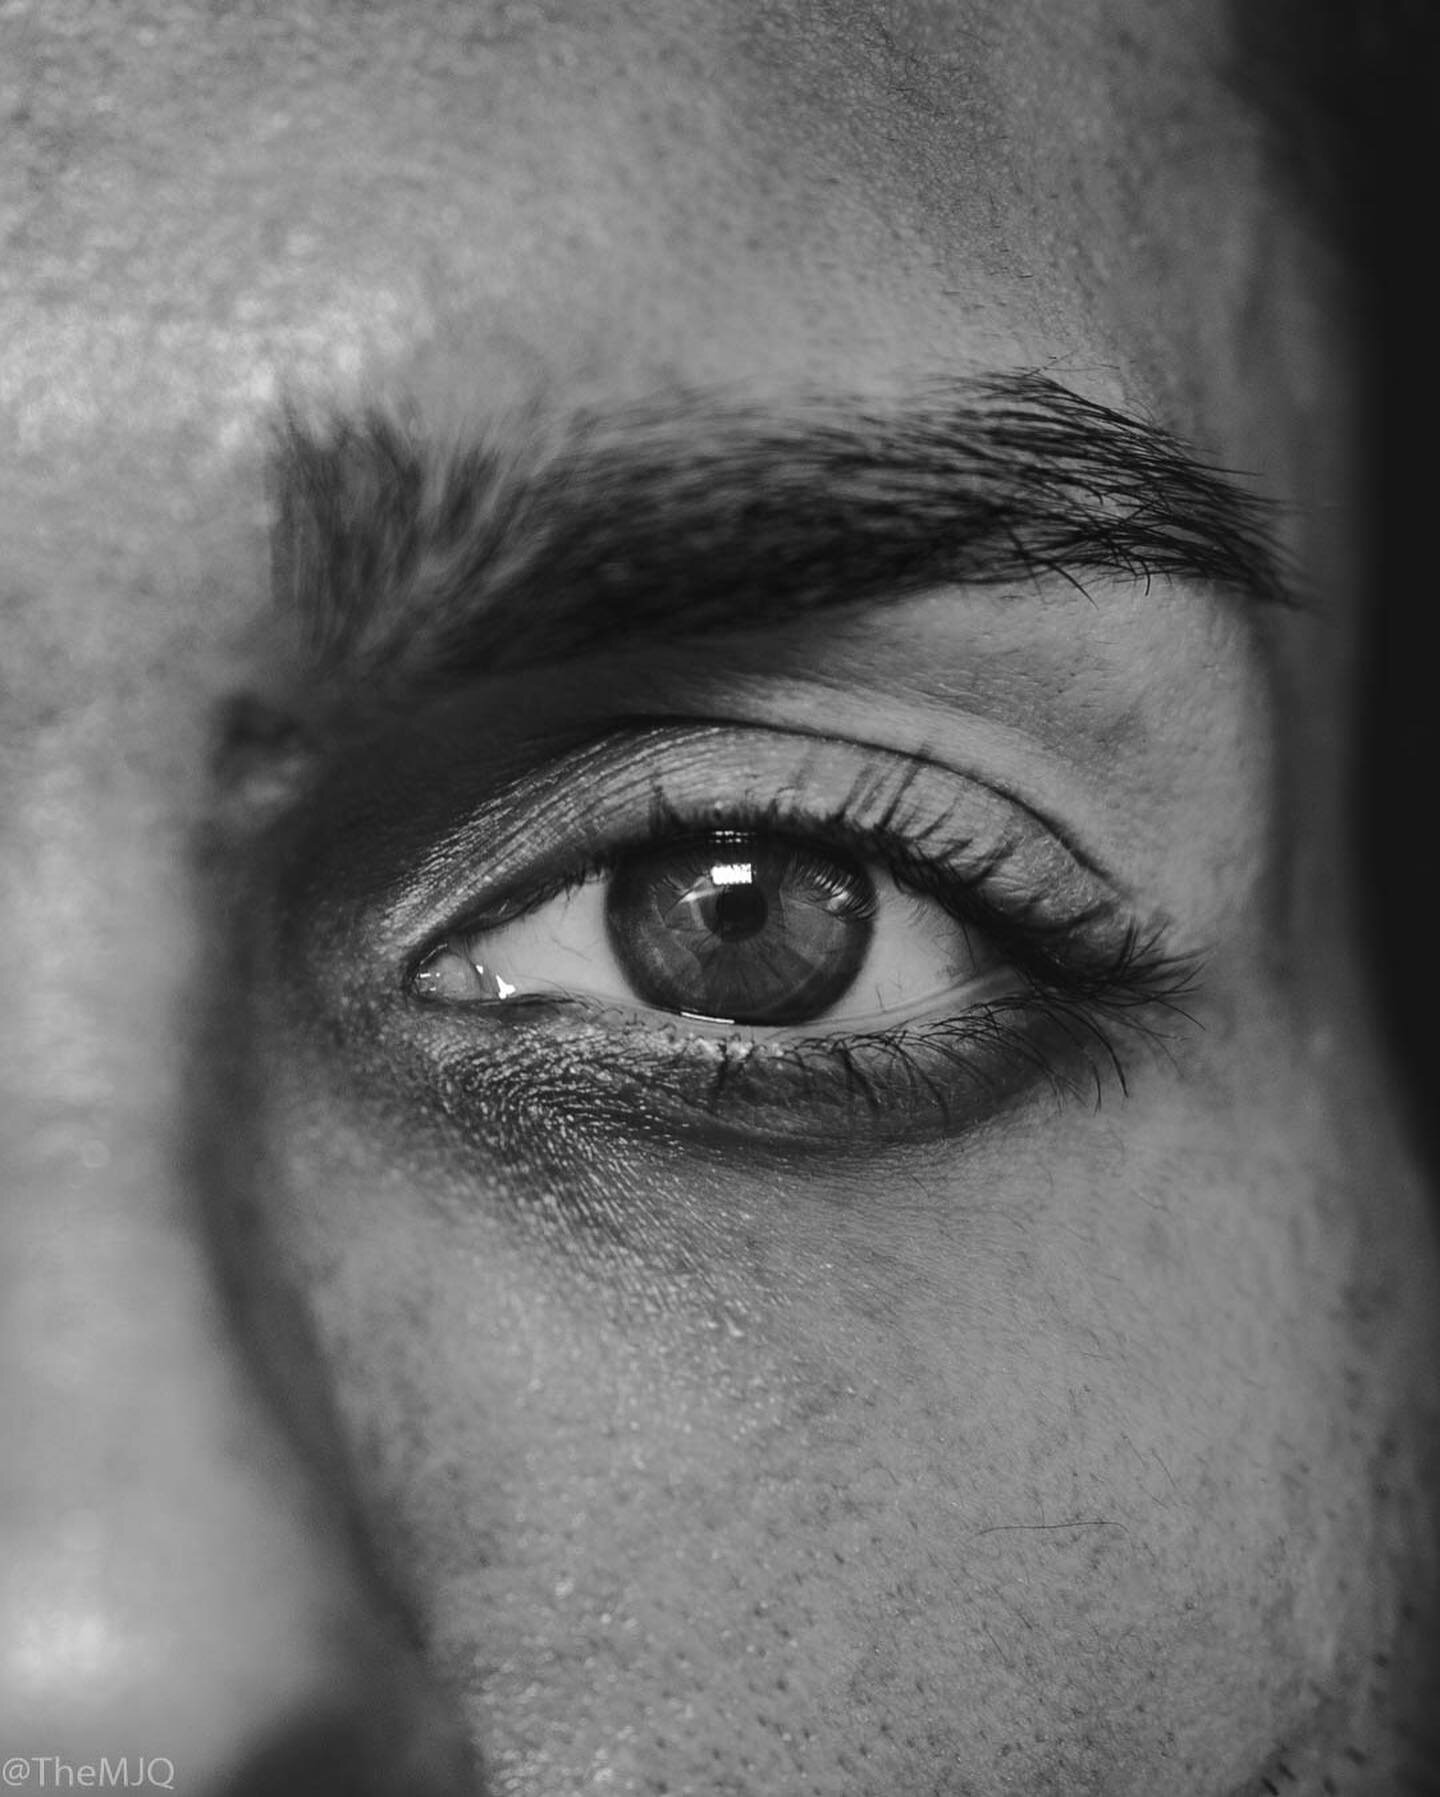 💡 👁 💡 
Shined some lights in my brown eyes which I thought looked best in black and white to show the contrast 🖤 A close up portrait can have such a moody vibe to it&hellip; or it&rsquo;s just me and the bright light making me look like I&rsquo;m